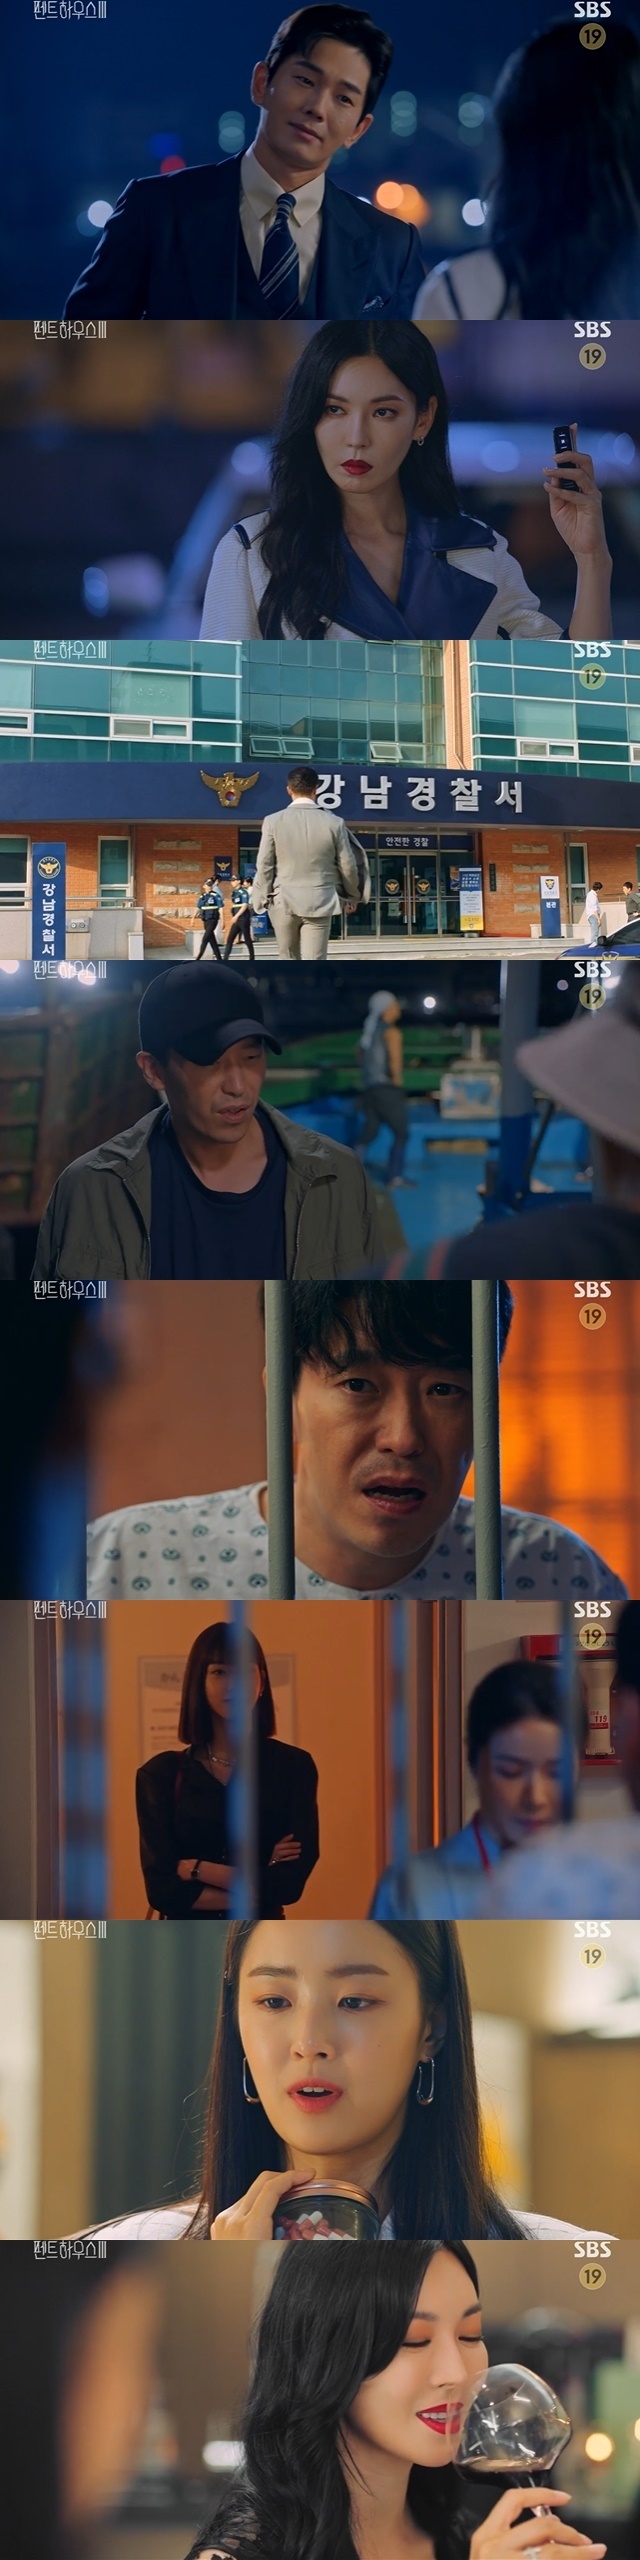 Choi Ye-bin fed Mo Kim So-yeon a memory-sharp drug while Um Ki-joon was incarcerated at Japan Mental Hospital.In the 10th episode of SBS Friday drama Penthouse 3 (played by Kim Soon-ok, directed by Ju Dong-min), which aired on August 13, Shim Soo-ryun (Lee Ji-ah) Logani (played by Park Eun-seok) and others planned to bring down Ju Dan-tae (Um Ki-joon) Chun Seo-jin (played by Kim So-yeon).The people who exposed and fought each crime of Ju Dan-tae and Chun Seo-jin on this day were Shim Soo-ryun, Loganri, Ha Yoon-chul (Yoon Jong-hoon), Yoo Dong-pil (Park Ho-san), and Kang Ma-ri (Shin Eun-kyung).They not only killed Oh Yoon-hee (Yu-jin), but also vowed to cooperate for private revenge, saying that they would not forgive the two people who insulted the body after death.They released Baek Joon-ki (Won Ju-wan) as Lee Yong as the next operation, and he was deliberately released by James (Park Eun-seok) and then approached Chun Seo-jin and Ju Dan-tae.Ha Yoon-chul told Baek Jun-ki, Find the evidence that you said that Chun Seo-jin had Incarcerated Logani. He planted a position tracking chip on his arm.Since then, Baek Jun-ki has threatened Chun Seo-jin and Ju-tae with 200 billion won each because he will hand over evidence that he had Incarcerated Logan Lee and that he had blown Logan Lees car.So, I have a trick to say, Turn the picture to the original, and hand over the evidence that Chun Seo-jin has Incarcerated Logan.Then I will give you 300 billion won. Baek Jun Ki accepted it as a mad smile.Chun Seo-jin tried to raise 200 billion won by selling the Myeong-dong building and all the bonds that could be disposed of, and Ju-dan-tae tried to finance the Cheong-a group in the name of investment in the Chunsu district.In order to re-appoint the chairman of the general shareholders meeting scheduled for a while, Judantae put the funds into the nickname account named Lee Kyu-jin (Bong Tae-kyu) to prevent any possible crisis.Yoo Dong-pil overheard all of this masters plans.Instead of passing 200 billion won to Baek Jun-ki, Chun Seo-jin received a recorder containing his Logani Incarceration.Baek Joon-ki received 200 billion won and took a stowaway ship and said, I prepared a gift for the commemoration of my departure from Korea. I recorded another interesting thing on the recorder.Inside it was the words of Ju Dan-tae, I will give you 300 billion won, so you will pass along the evidence that Chun Seo-jin has Incarcerated Logan. Chun Seo-jin grinded his teeth.The real operation was just beginning. Yoo Dong-pil told Lee Kyu-jin, The baby boy group is about to go bankrupt.Lee Kyu-jin has withdrawn all 500 billion won from his nickname account and tried to escape overseas.500 billion won of Judantae entered the paper company in the name of Gosanga (Yoon Joo-hee).Jin Pung-hong (played by Ahn Yeon-hong) then scrambled. Jin Pung-hong demanded 500 billion won from Chun Seo-jin and Ju Dan-tae, as did Baek Joon-ki, who held the hand he held.So, Chun Seo-jin sold the rest of the buildings he had, and he paid all the slush funds hidden overseas.In this process, Judan Tae found out that Chun Seo-jin was the real killer who killed Oh Yoon-hee.Yoo Dong-pil (Park Ho-san) recognized the stowaway ship at Busan Port, pretending to help this state of affairs, and then he went to the police station and embroidered himself.Judantae, who did not know this fact, climbed on the boat as he said, and fell asleep after being hit by the sleep induction.Judantae woke up at the Japan Mental Hospital, where he had been carcinated by Baek Jun Ki over time. His name was back to Baek Jun Ki.Ju Dan-tae was astonished by Joo Seok-kyung (Han Ji-hyun), who appeared soon.Due to a series of things, Chun Seo-jin was appointed as the chairman of the Cheonga Group, but this was also the intention of the heart training.I will leave Chun Seo-jin alone until then, Shim said, saying that he will break her down at the shareholders meeting of the Cheonga Group.